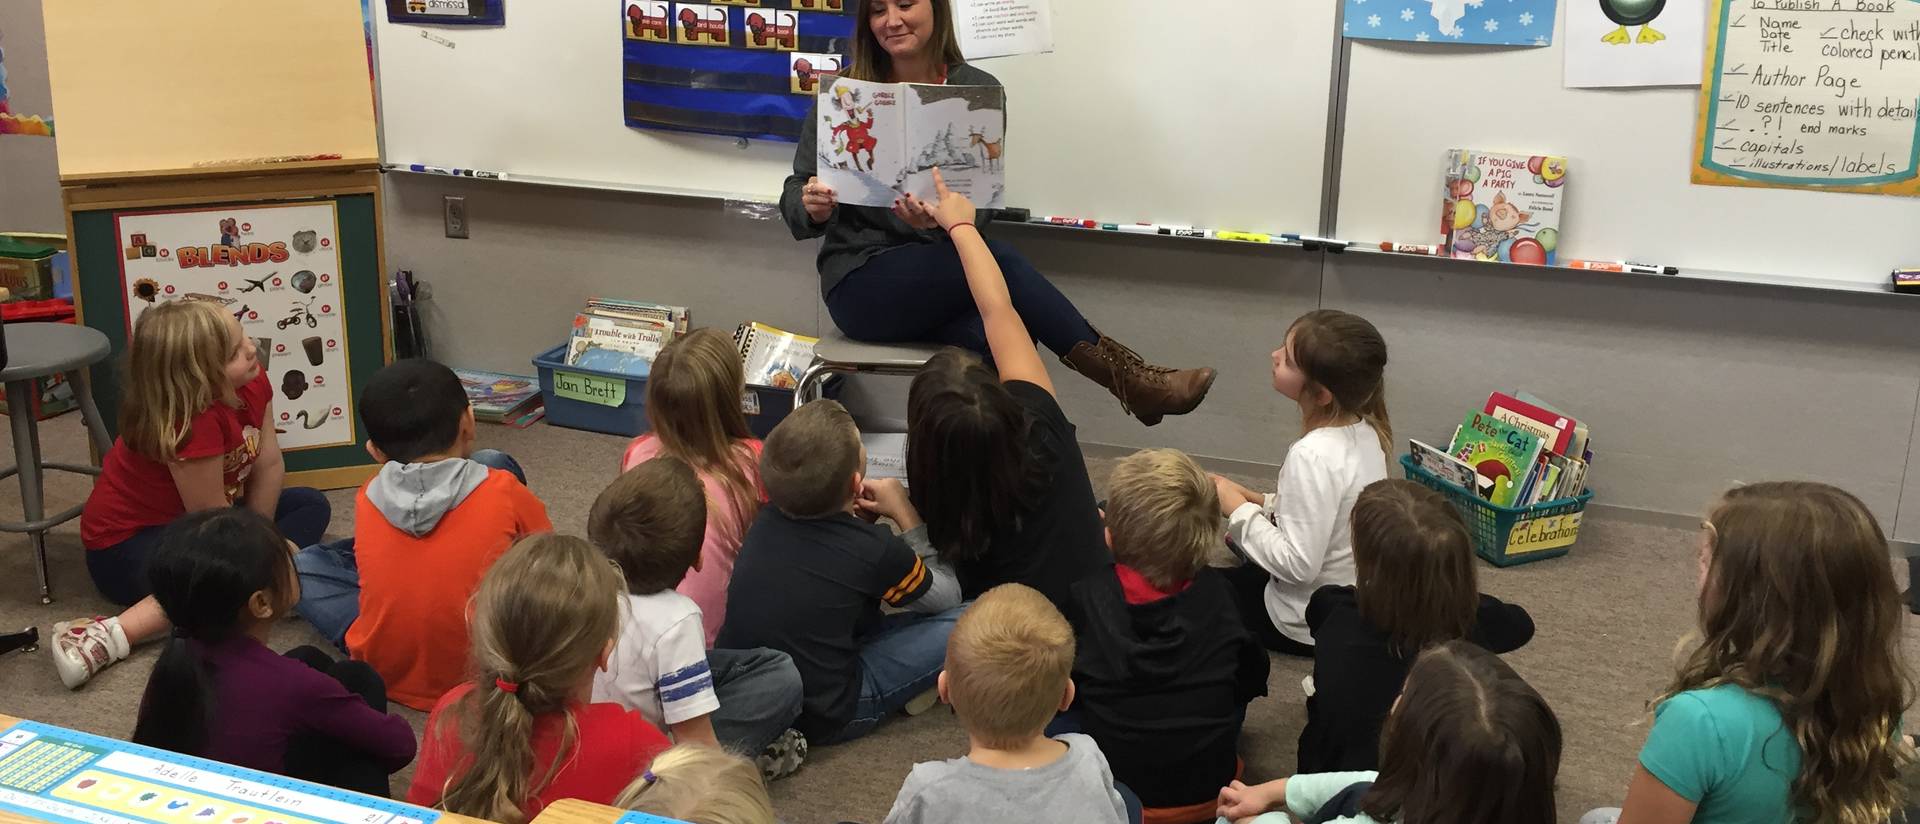 Student Rebecca Lenz reads to class during practicum experience